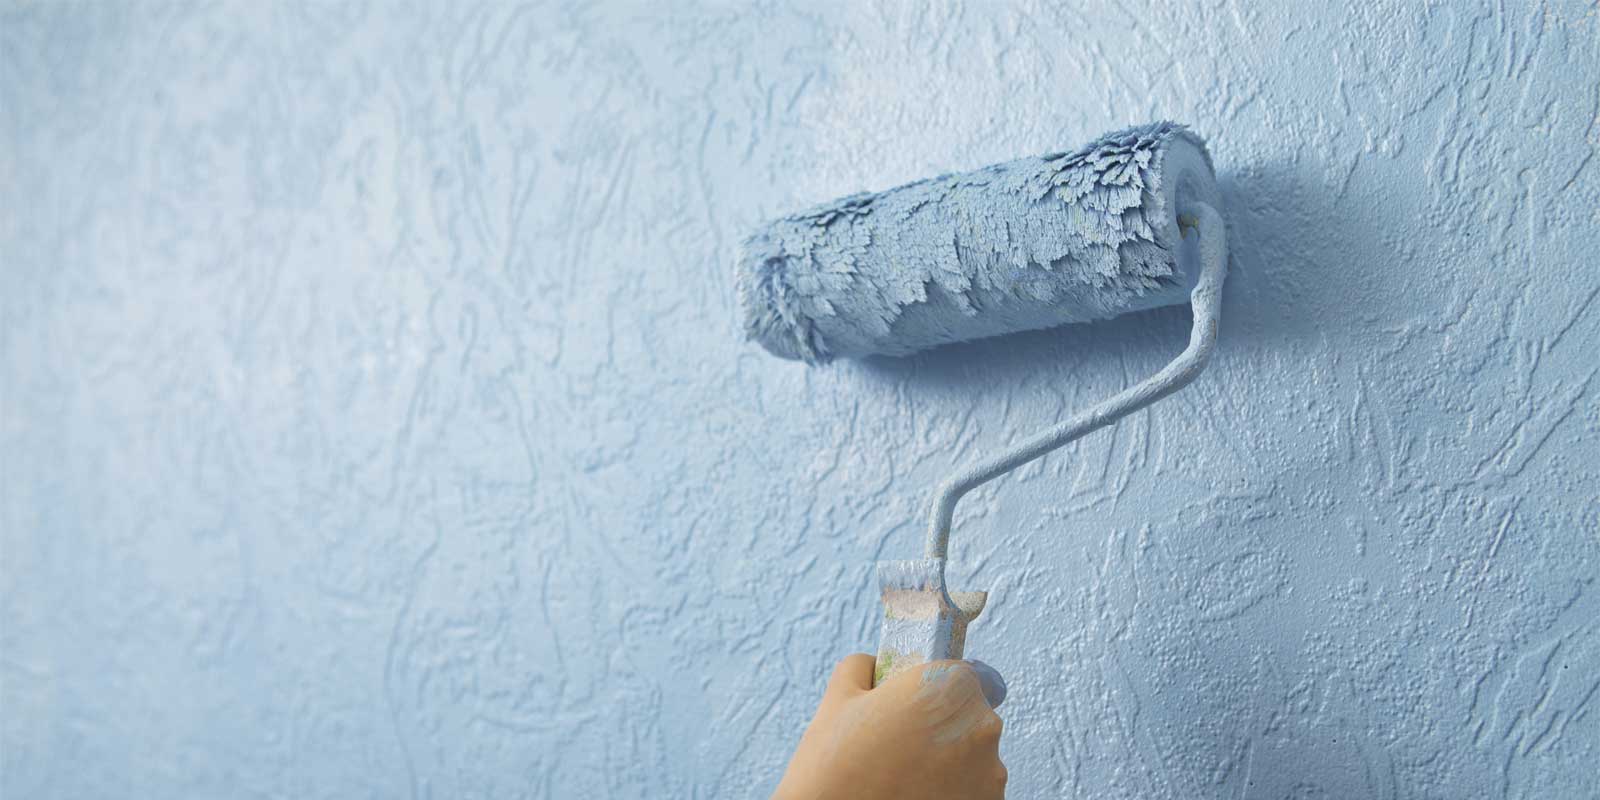 Image of a textured wall being painted with a roller